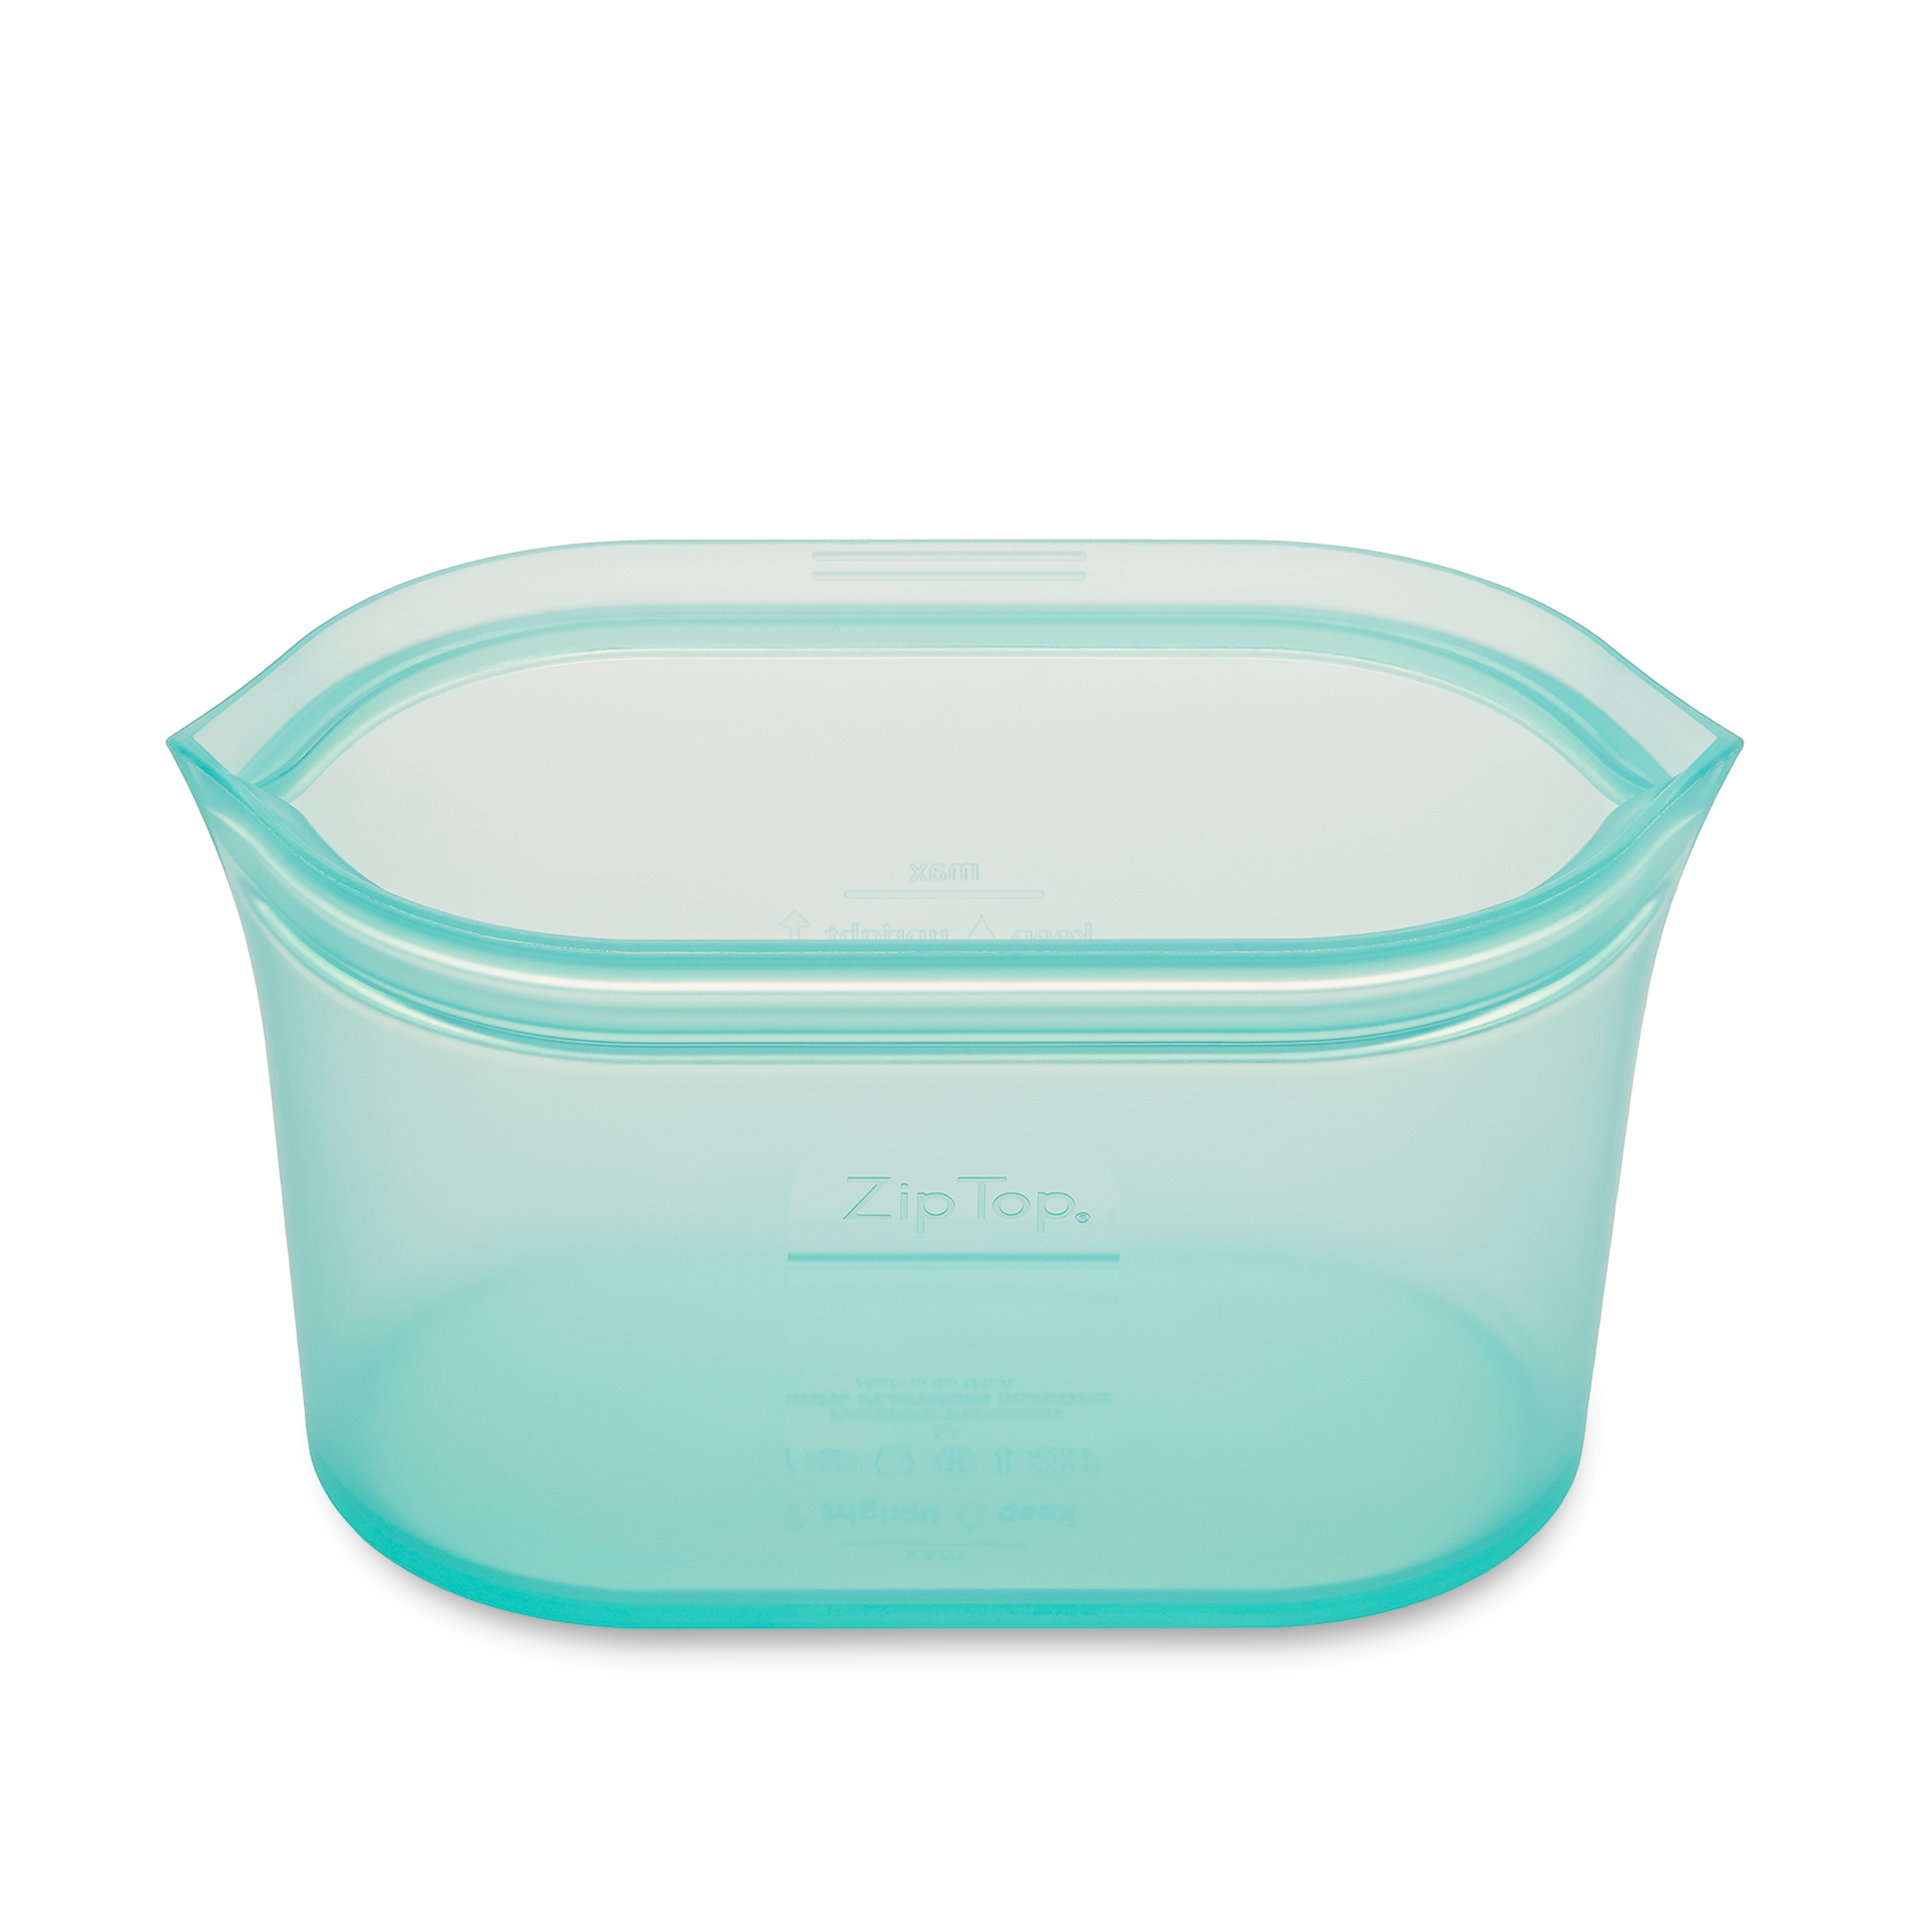  Zip Top Reusable Food Storage Bags, Medium Cup [Teal], Silicone Meal Prep Container, Microwave, Dishwasher and Freezer Safe